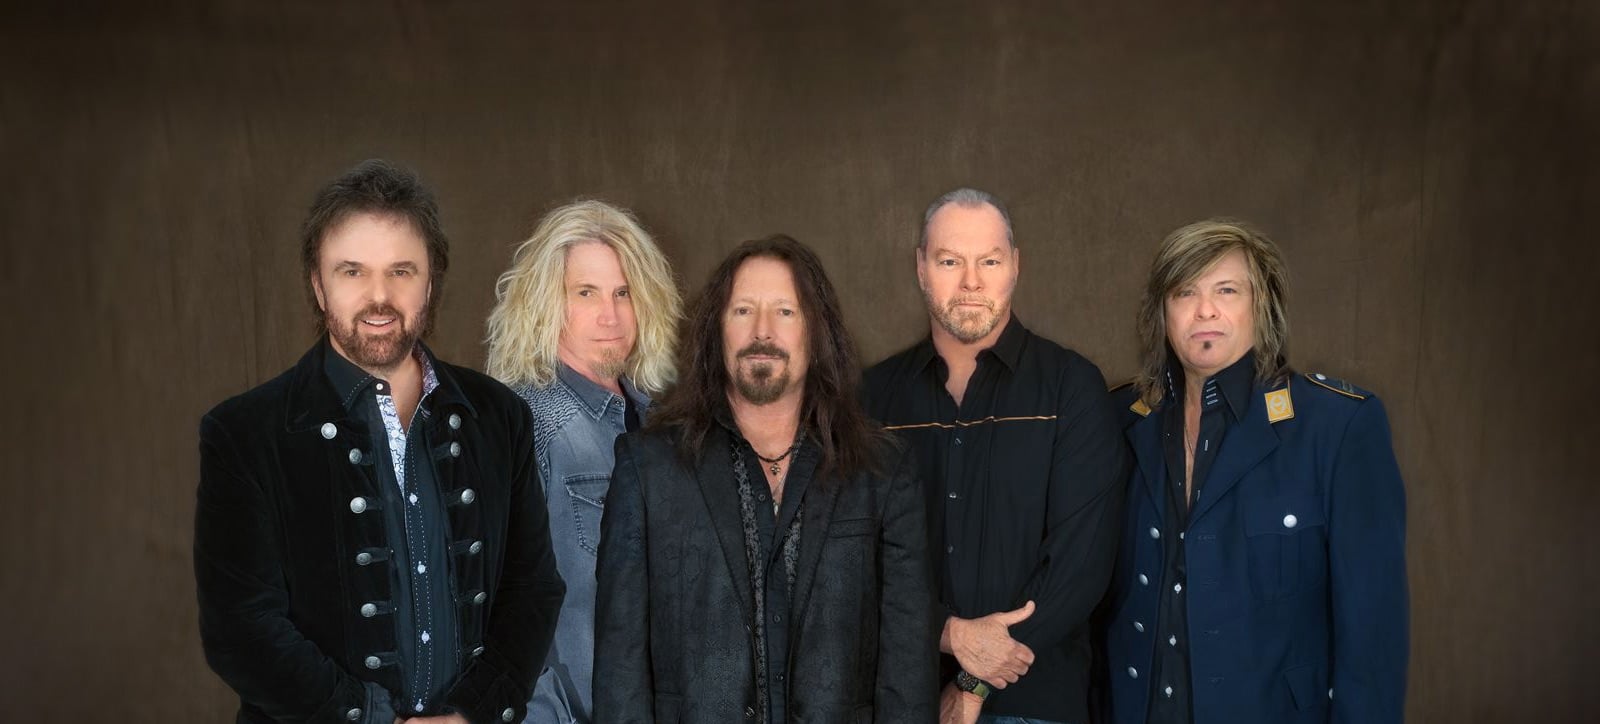 38 Special band